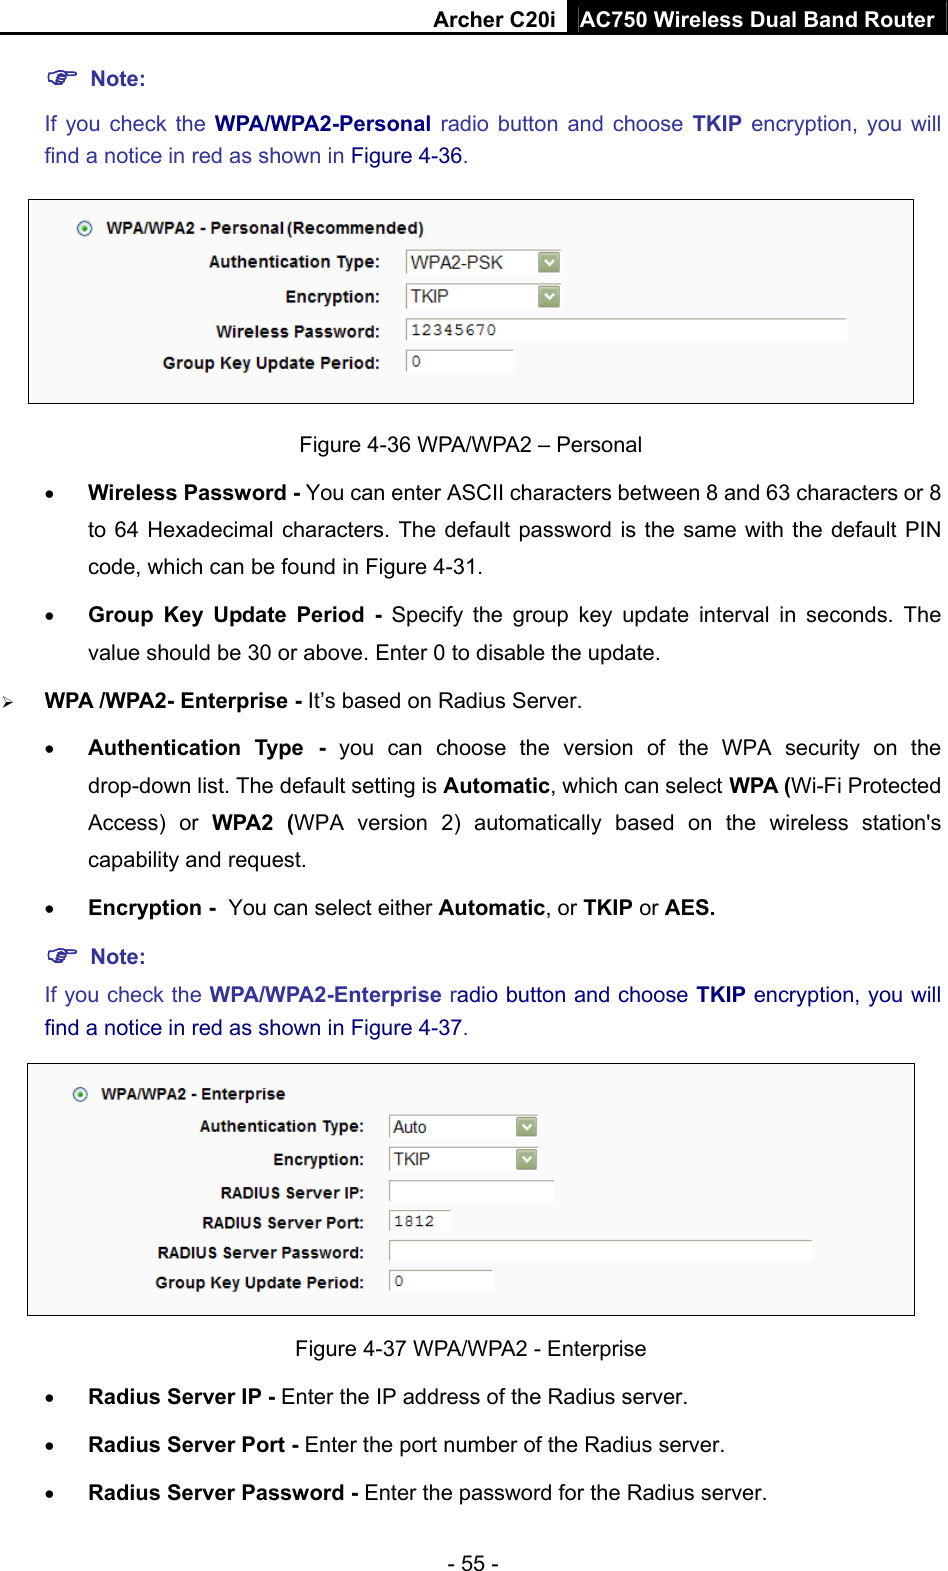 Archer C20i AC750 Wireless Dual Band Router - 55 - ) Note:  If you check the WPA/WPA2-Personal radio button and choose TKIP encryption, you will find a notice in red as shown in Figure 4-36.  Figure 4-36 WPA/WPA2 – Personal • Wireless Password - You can enter ASCII characters between 8 and 63 characters or 8 to 64 Hexadecimal characters. The default password is the same with the default PIN code, which can be found in Figure 4-31. • Group Key Update Period - Specify the group key update interval in seconds. The value should be 30 or above. Enter 0 to disable the update. ¾ WPA /WPA2- Enterprise - It’s based on Radius Server. • Authentication Type - you can choose the version of the WPA security on the drop-down list. The default setting is Automatic, which can select WPA (Wi-Fi Protected Access) or WPA2 (WPA version 2) automatically based on the wireless station&apos;s capability and request. • Encryption - You can select either Automatic, or TKIP or AES. ) Note: If you check the WPA/WPA2-Enterprise radio button and choose TKIP encryption, you will find a notice in red as shown in Figure 4-37.  Figure 4-37 WPA/WPA2 - Enterprise • Radius Server IP - Enter the IP address of the Radius server. • Radius Server Port - Enter the port number of the Radius server. • Radius Server Password - Enter the password for the Radius server. 